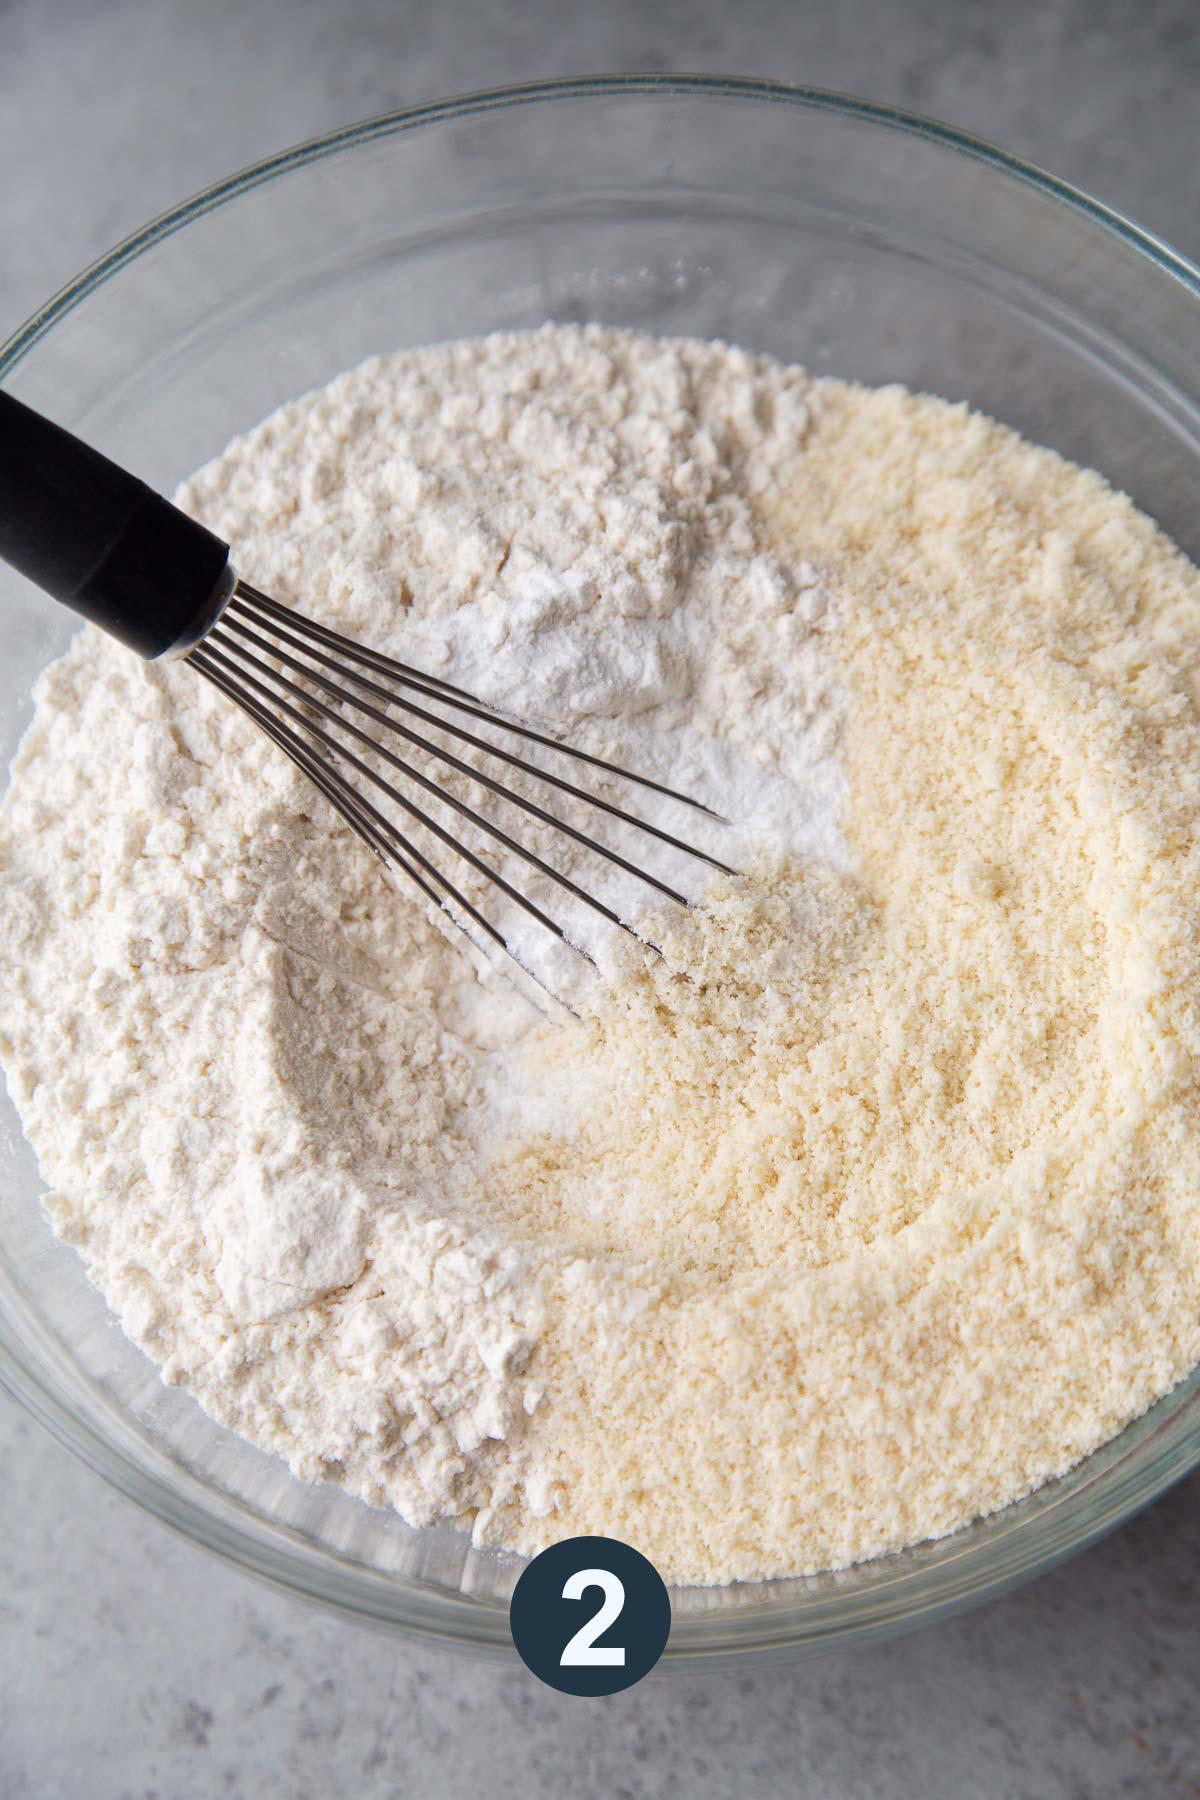 whisk together dry ingredients in large mixing bowl.